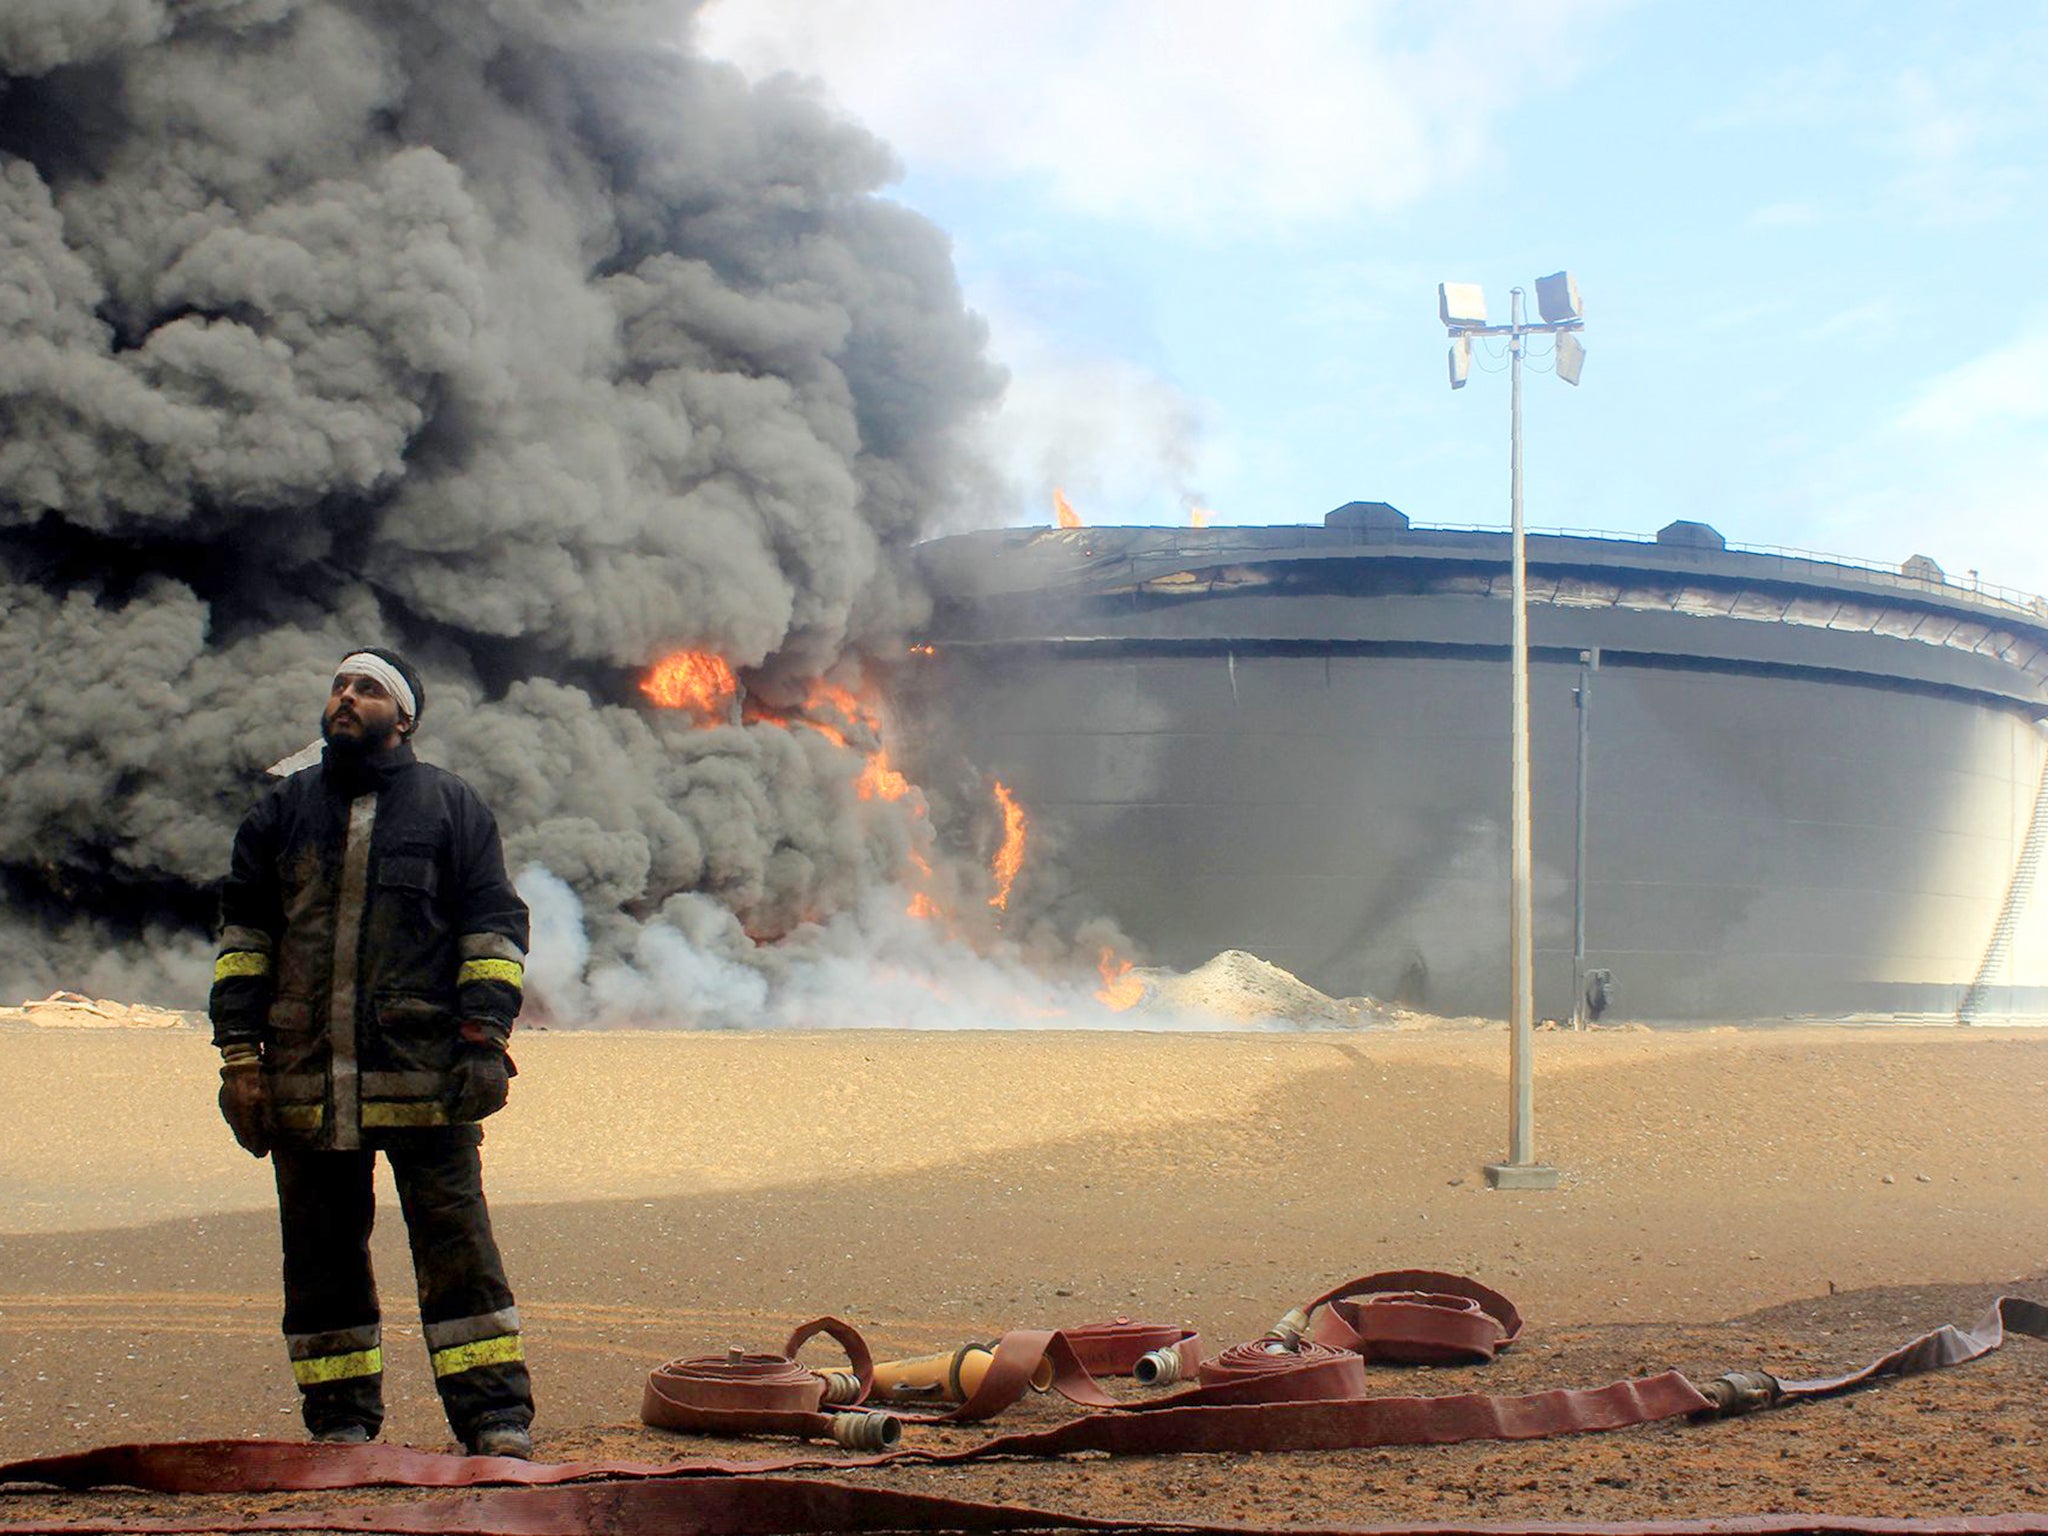 A Libyan fireman stands in front of an oil storage tank at an oil facility in northern Libya's Ras Lanouf region in February, after it was set ablaze following attacks launched by Isis jihadists (AP)